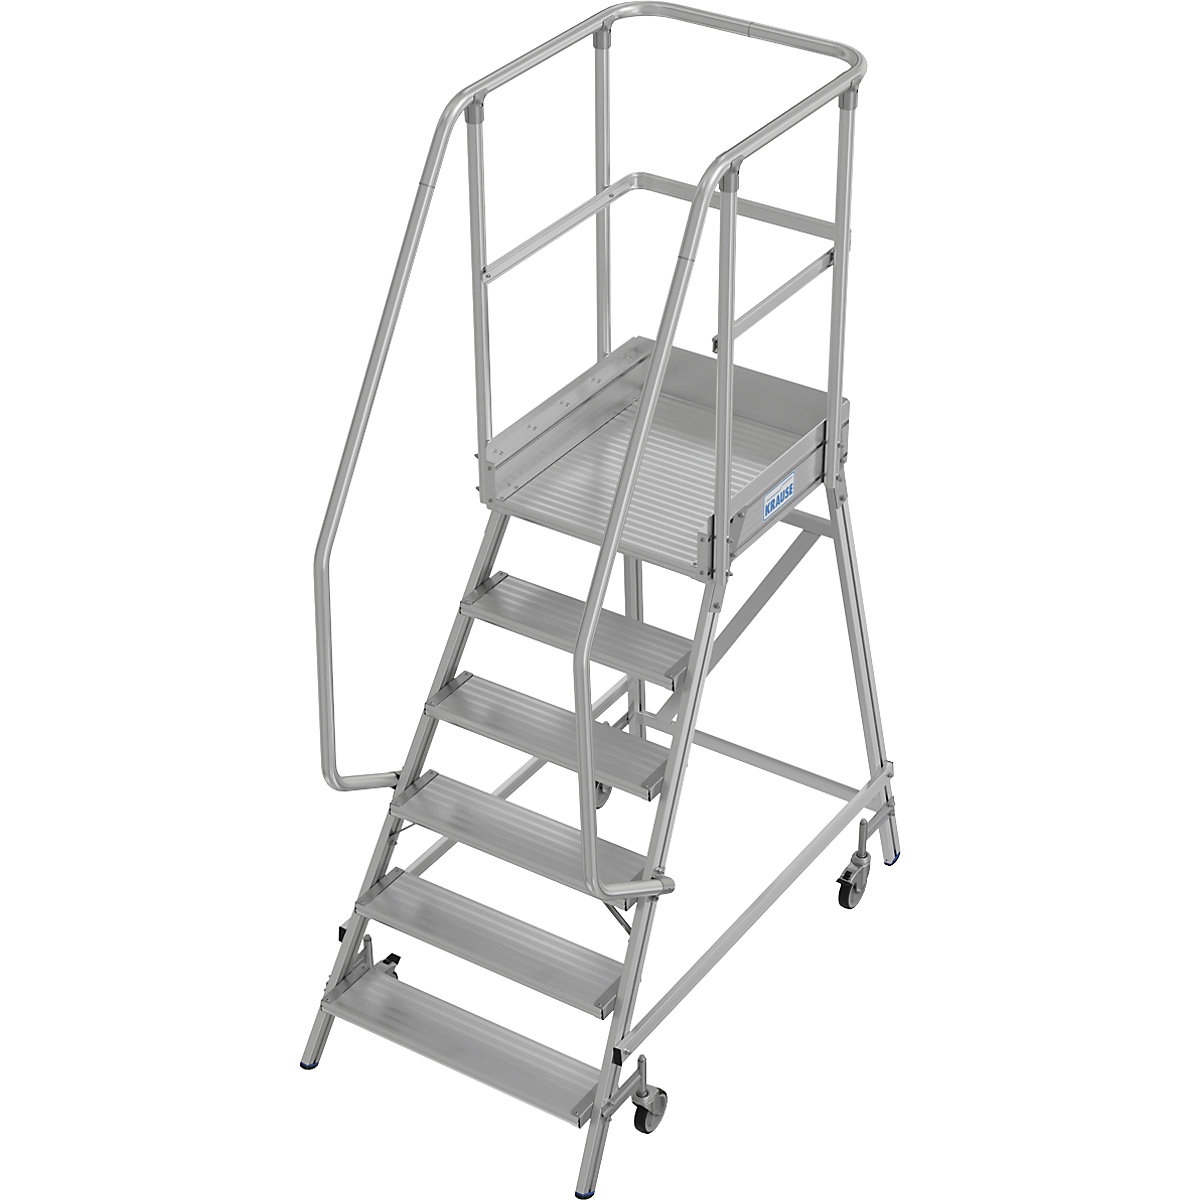 Mobile safety steps – KRAUSE, single sided access, foot rail, 6 steps, 2+ items-12